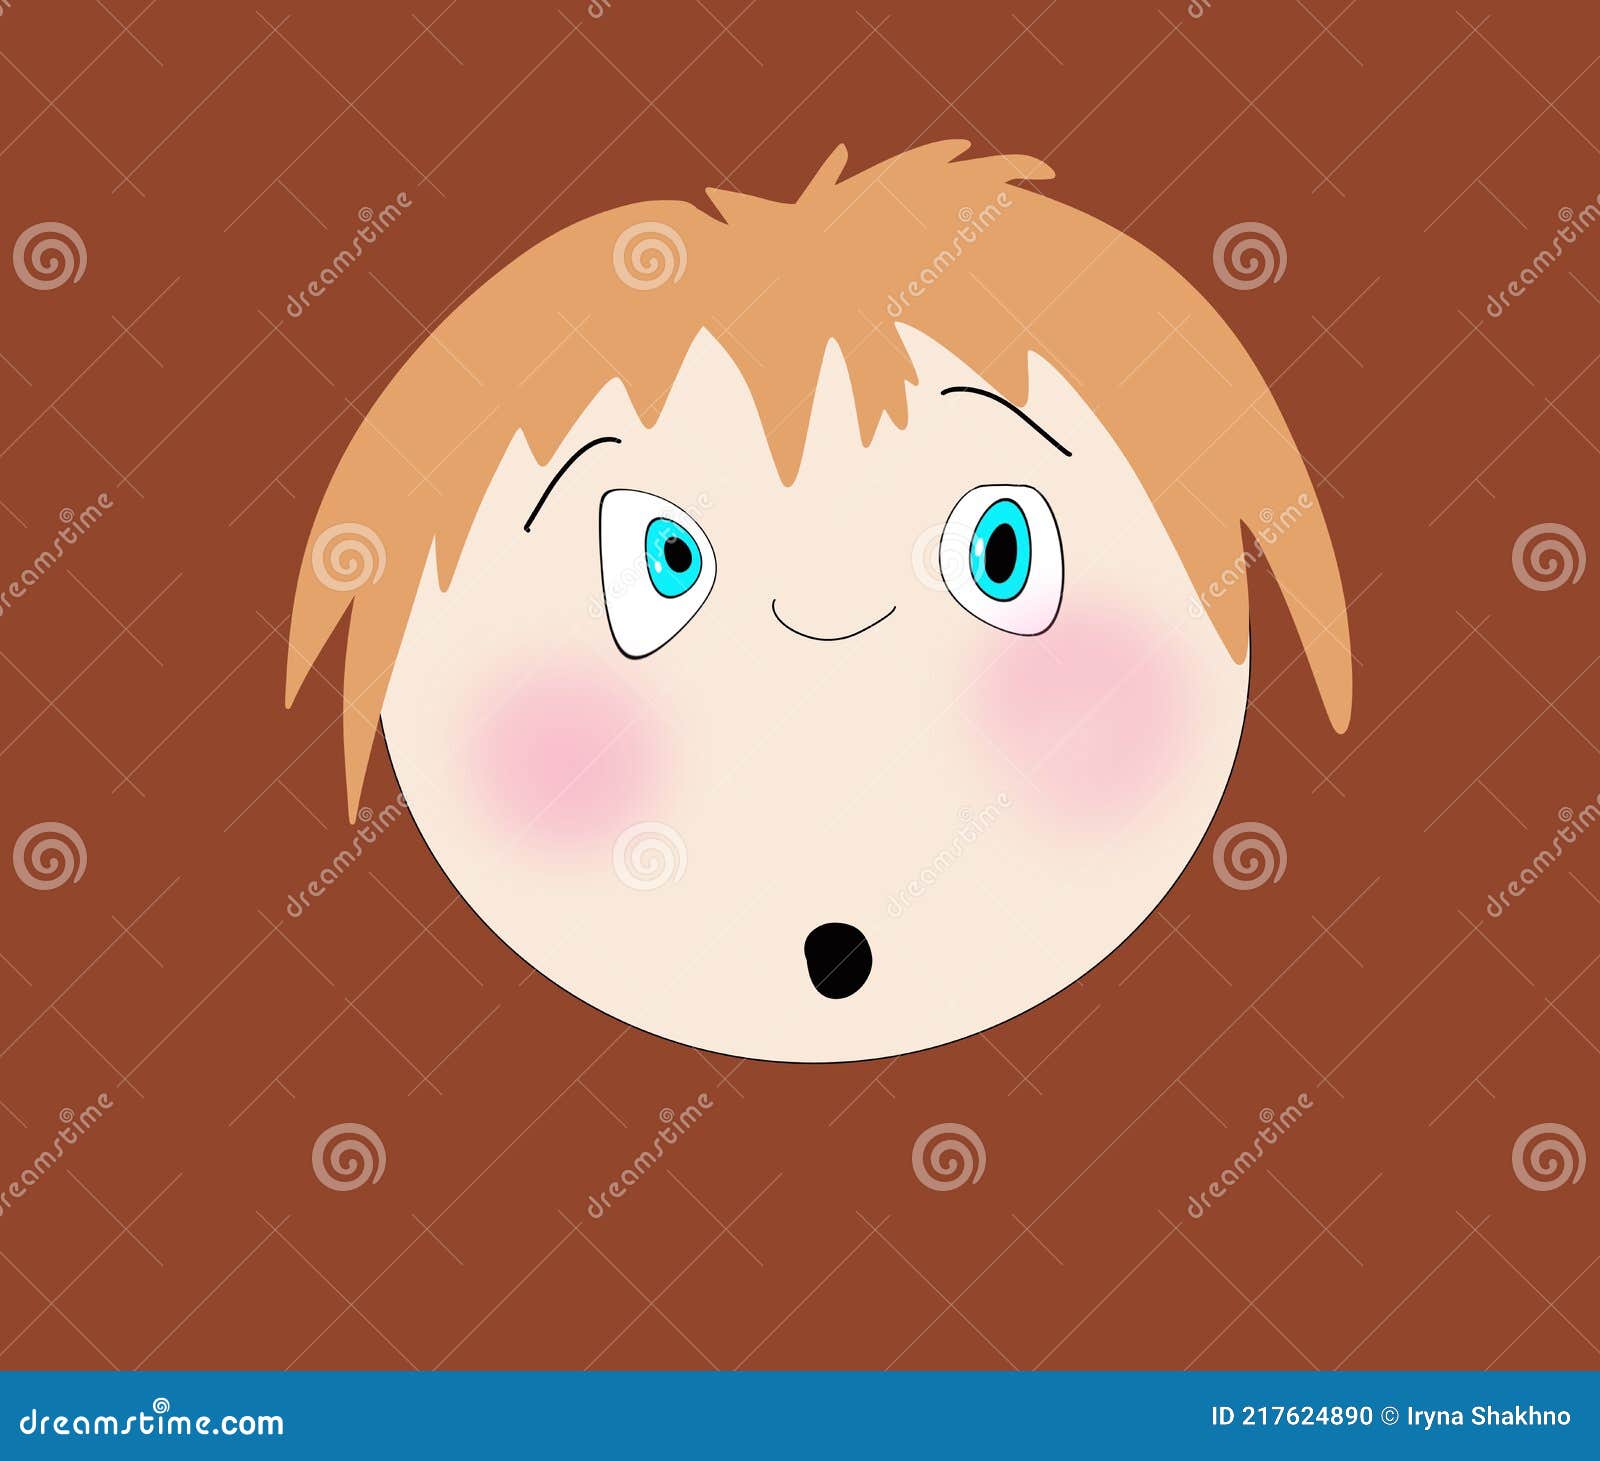 clipart of a surprised face